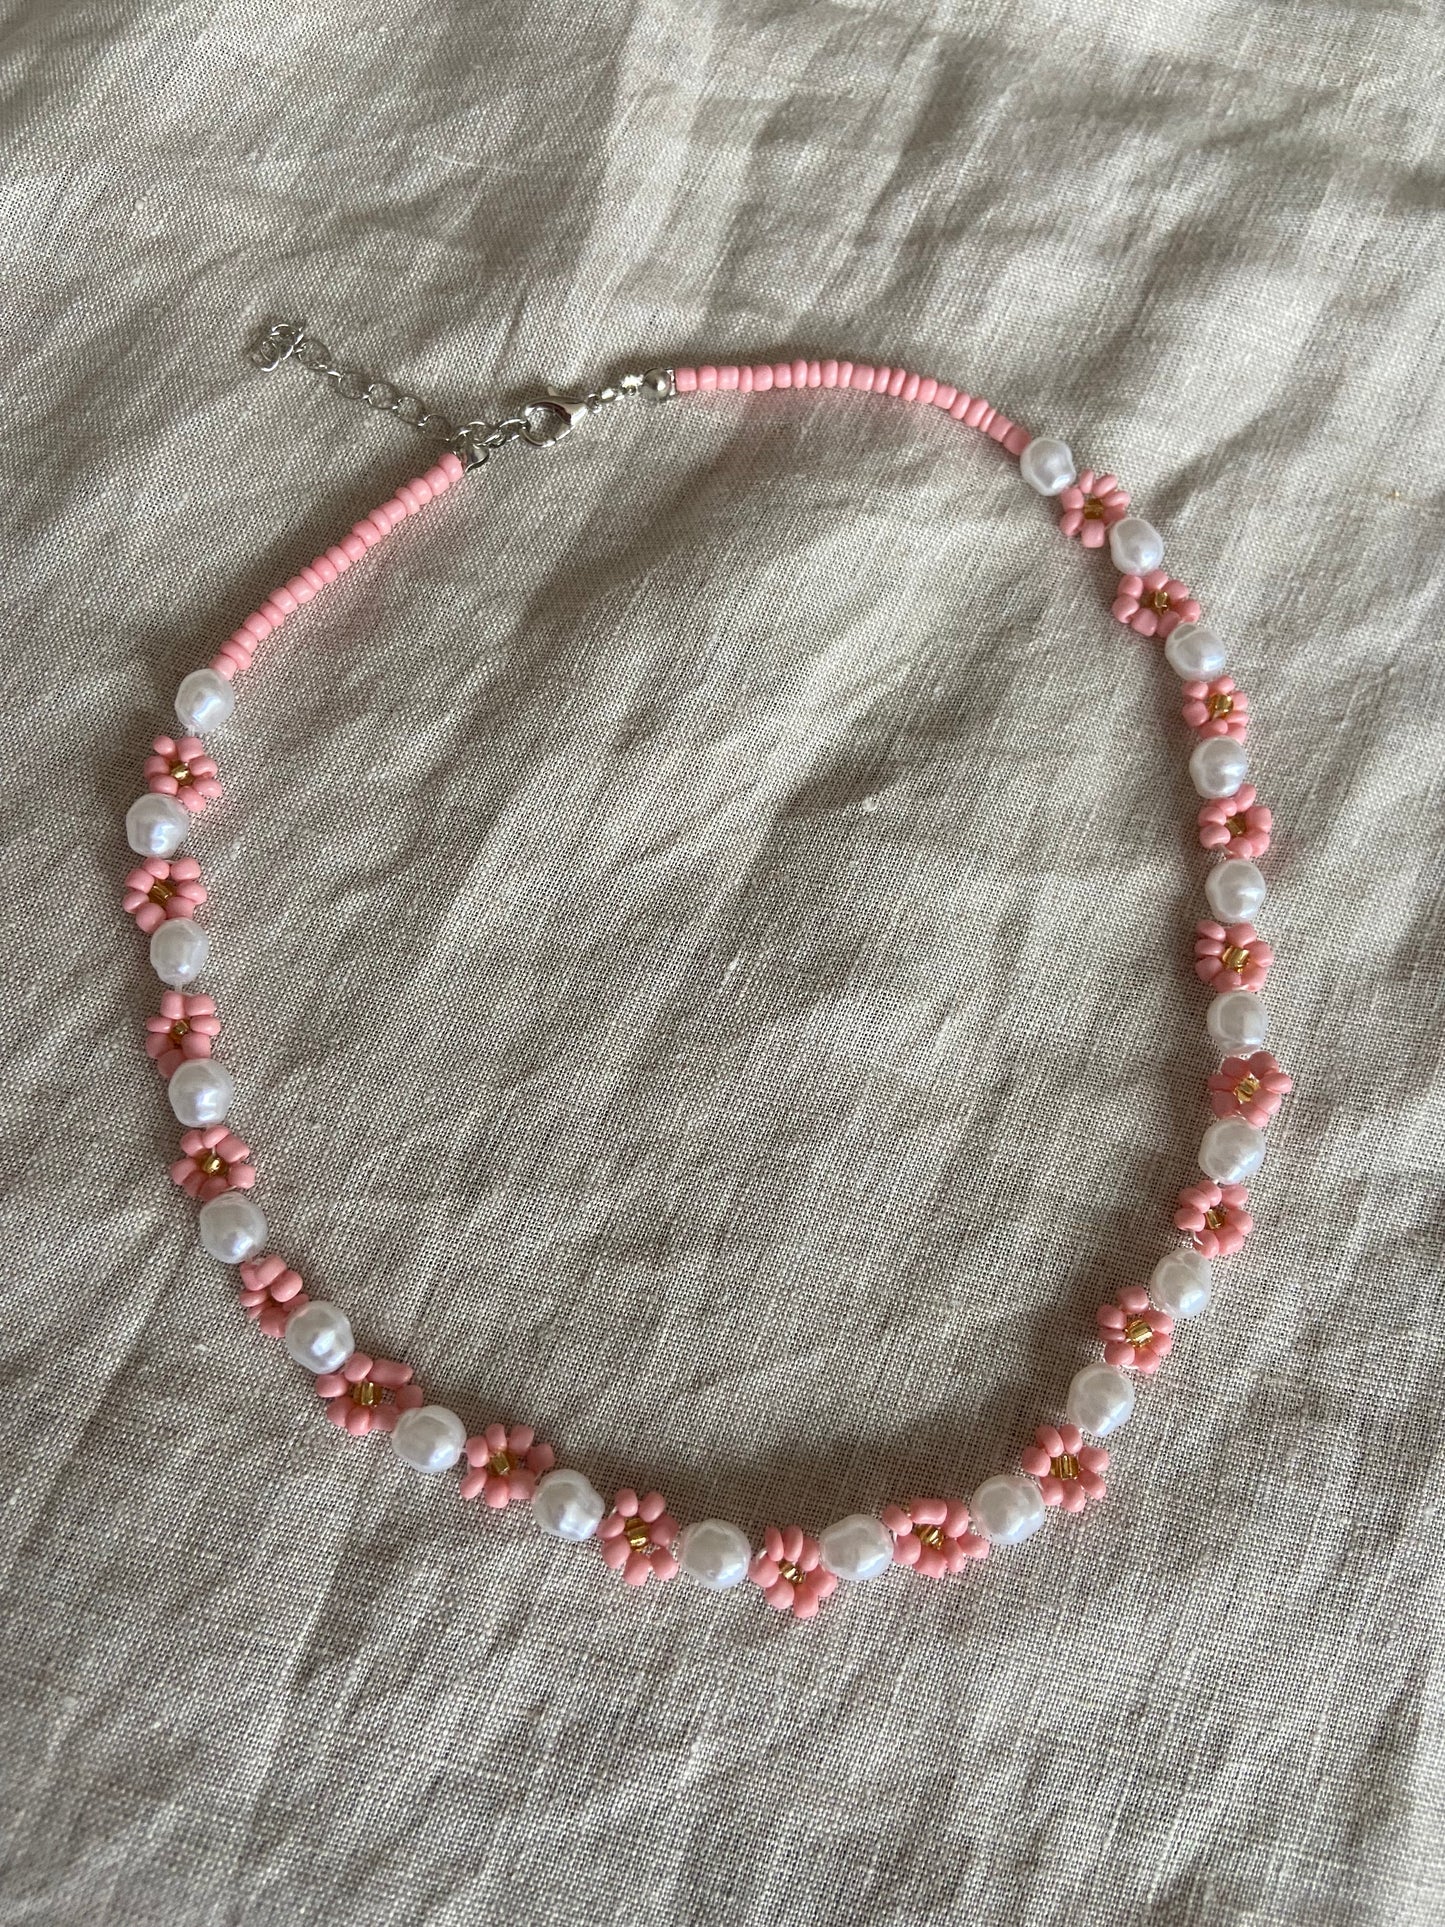 Pink Pearl Flower Necklace